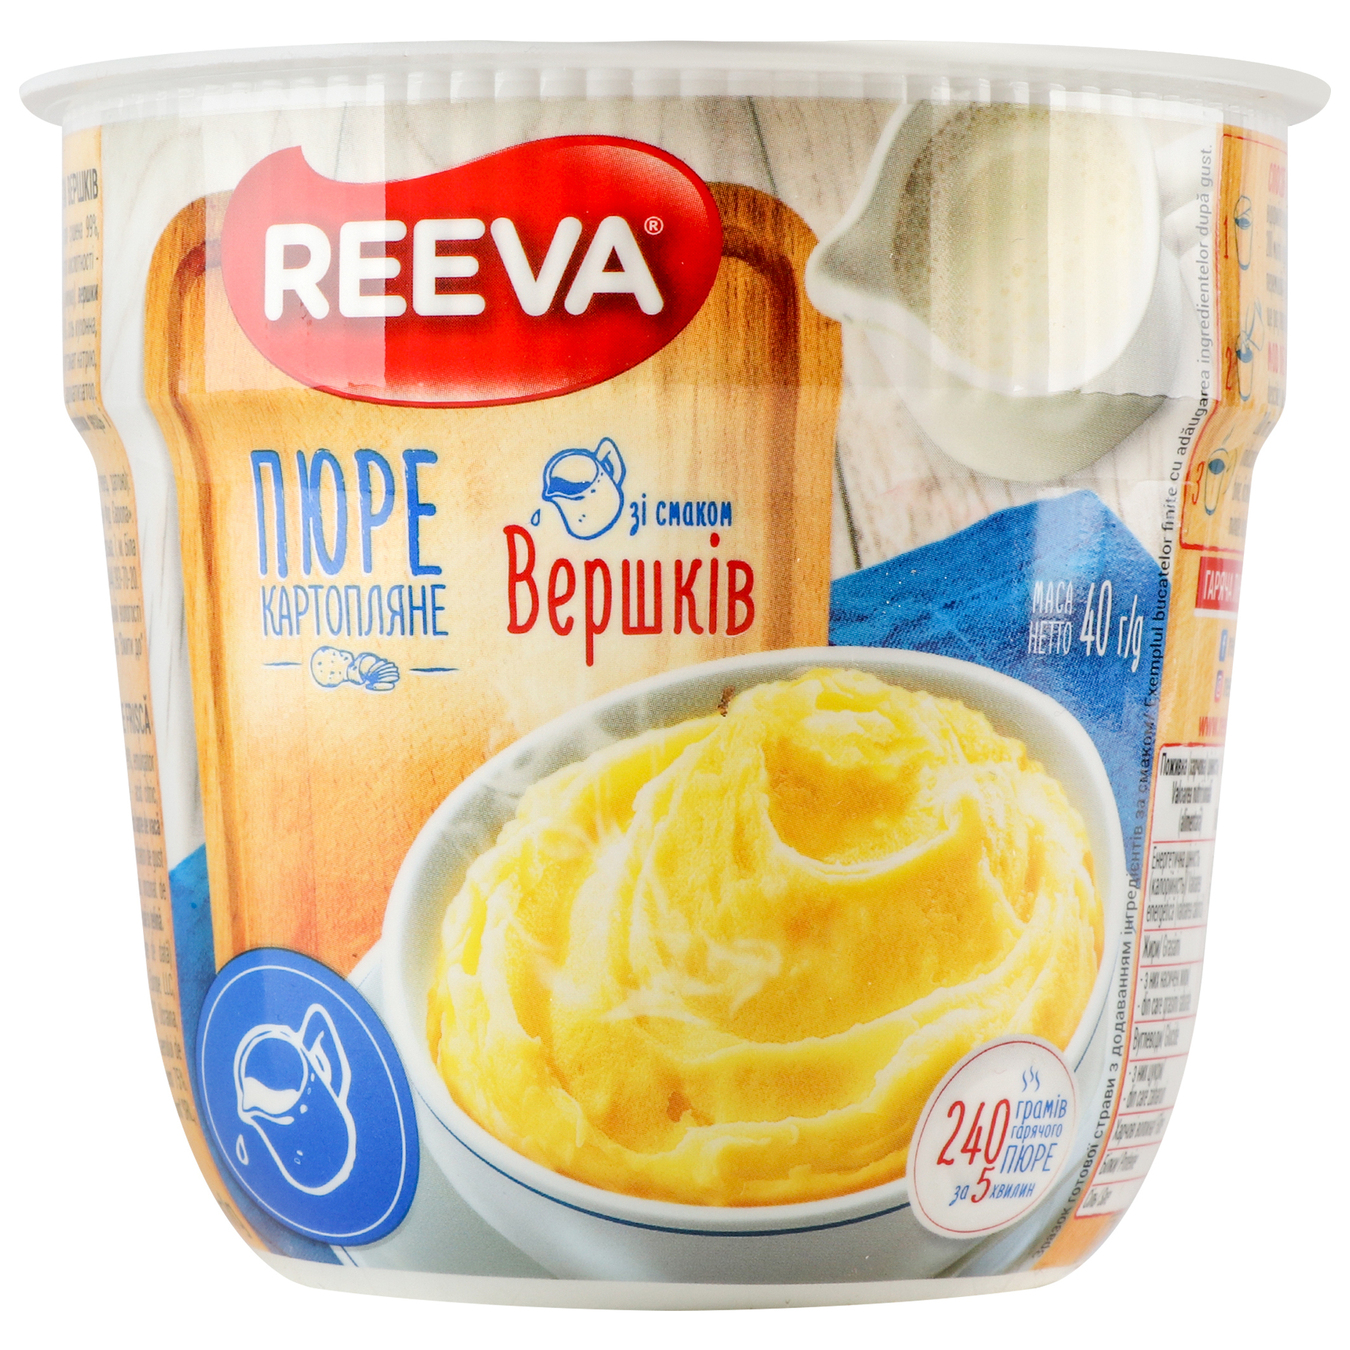 Reeva mashed potatoes with a taste of cream glass 40g